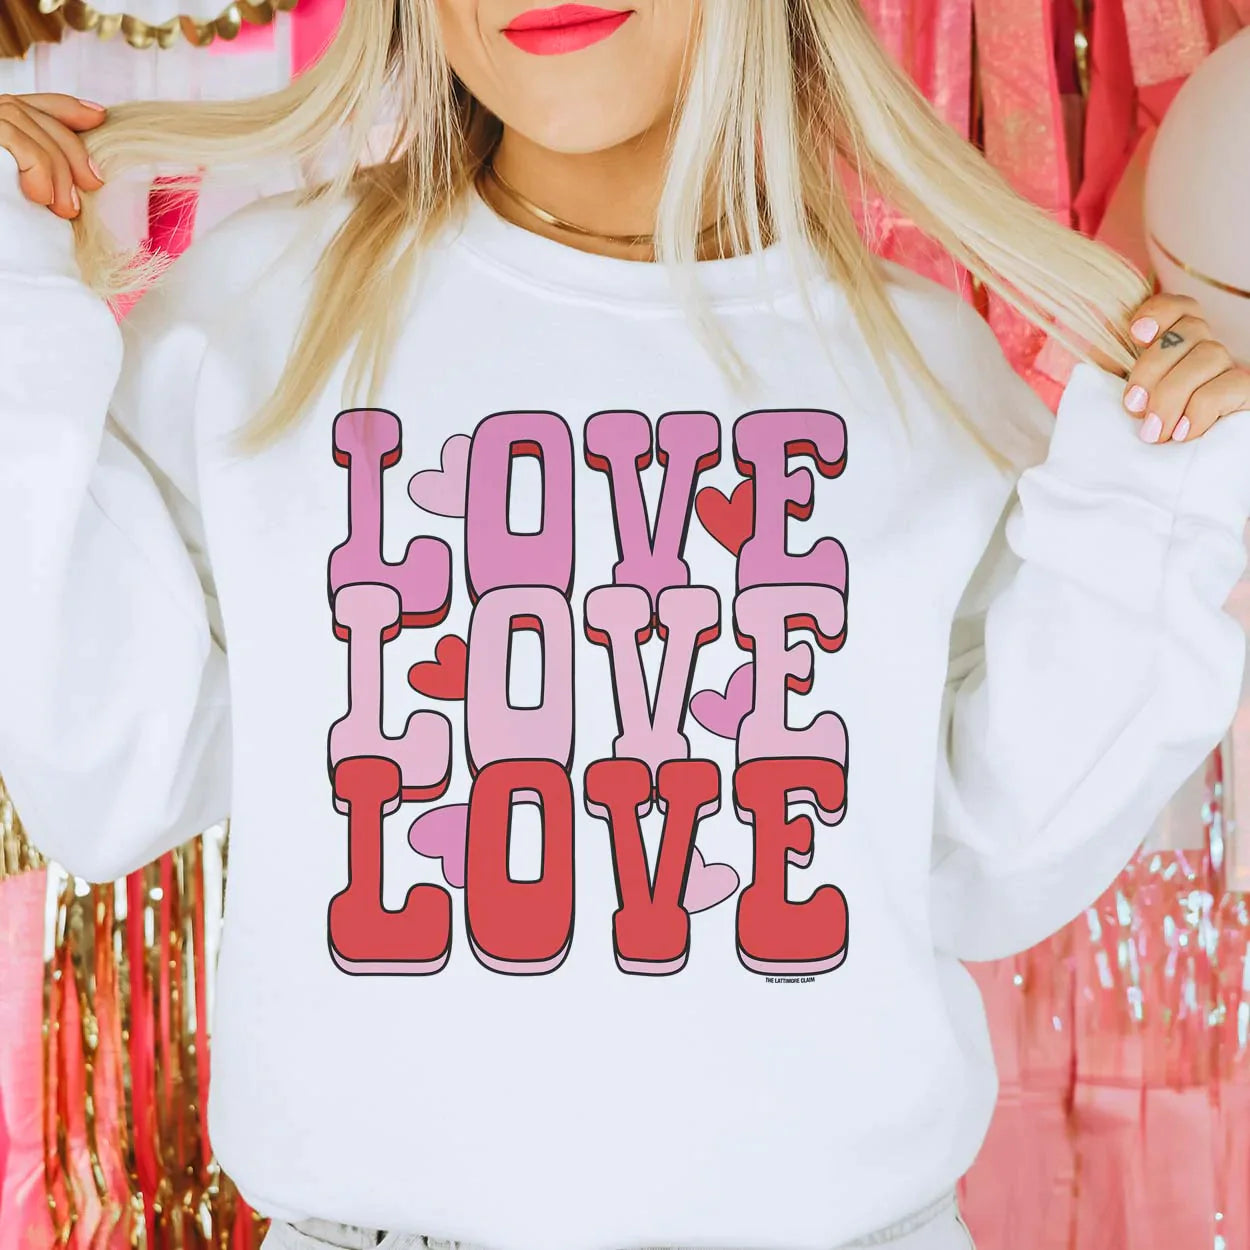 This white crew neck sweatshirt is shown being modeled with jeans and a gold necklace. The graphic says "love love love" in hot pink, light pink, and red colored bubble font stacked. There are also hot pink, light pink, and red hearts throughout the graphic. 